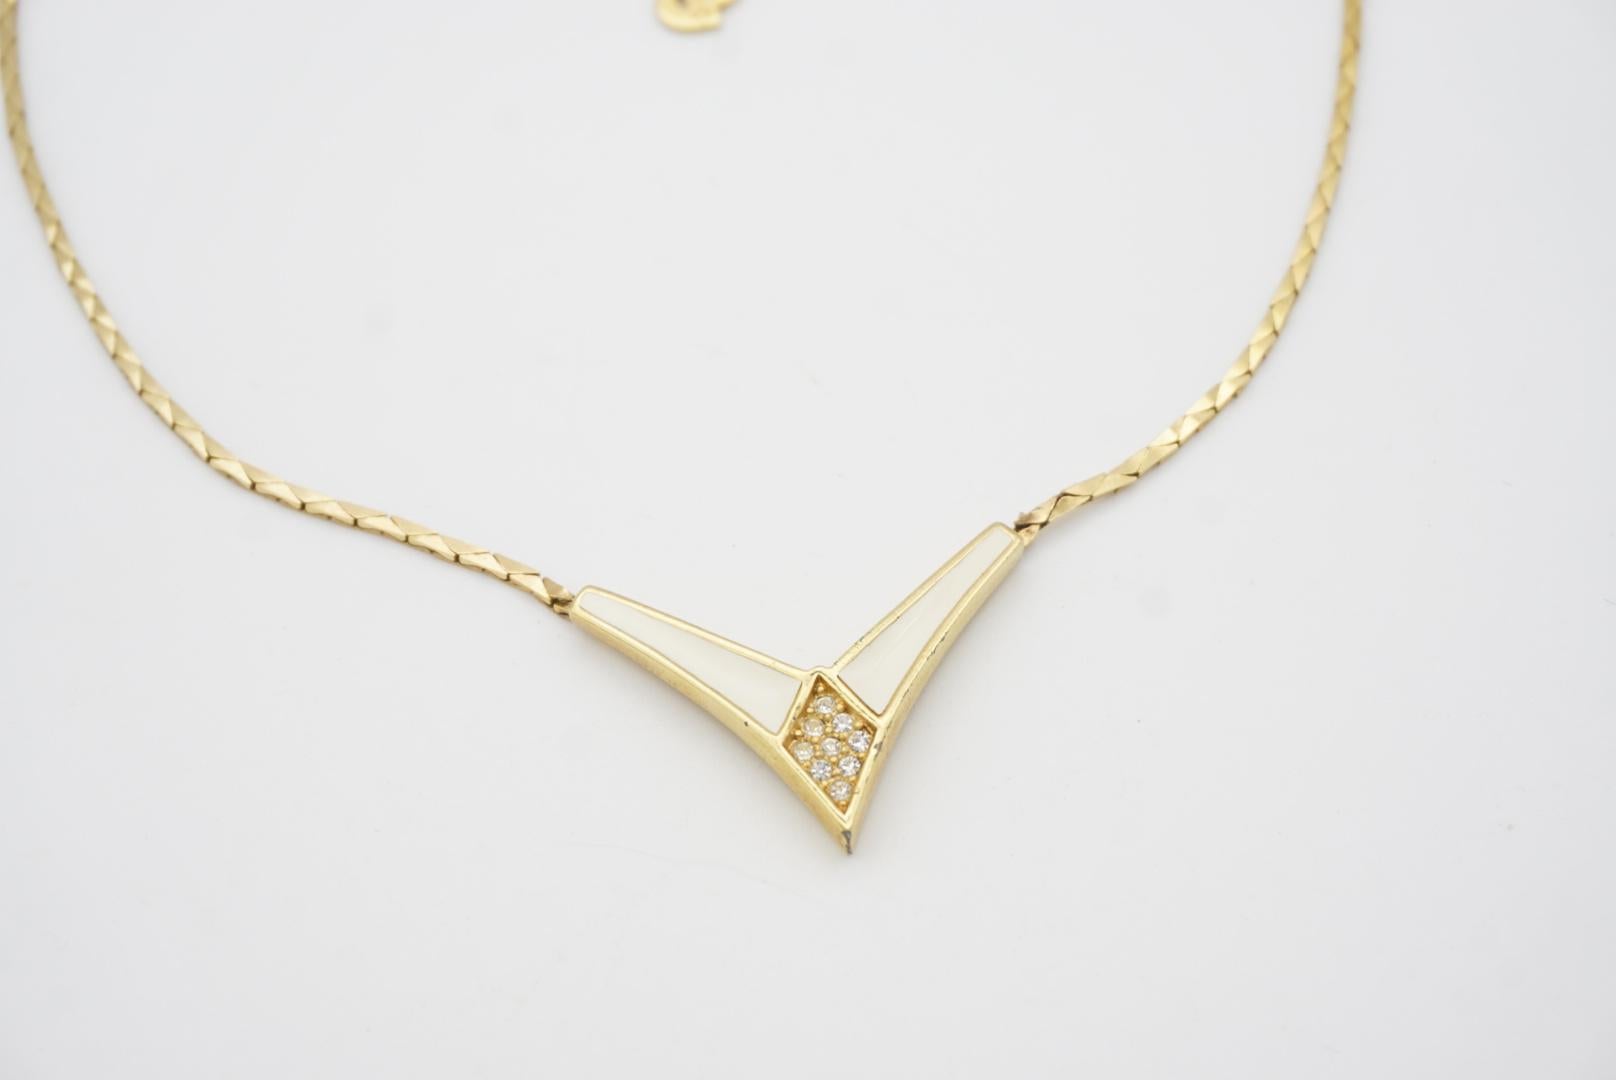 Christian Dior Vintage 1980s Cream Enamel Triangle Crystals Gold Chain Necklace  For Sale 1